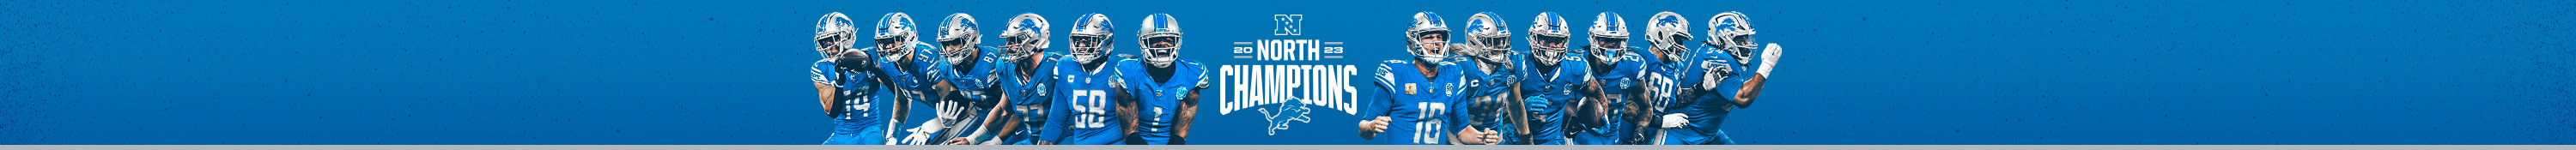 2023 NFC North Champions Lions banner. Banner includes images of several football players with on either side of the text "2023 North Champions".